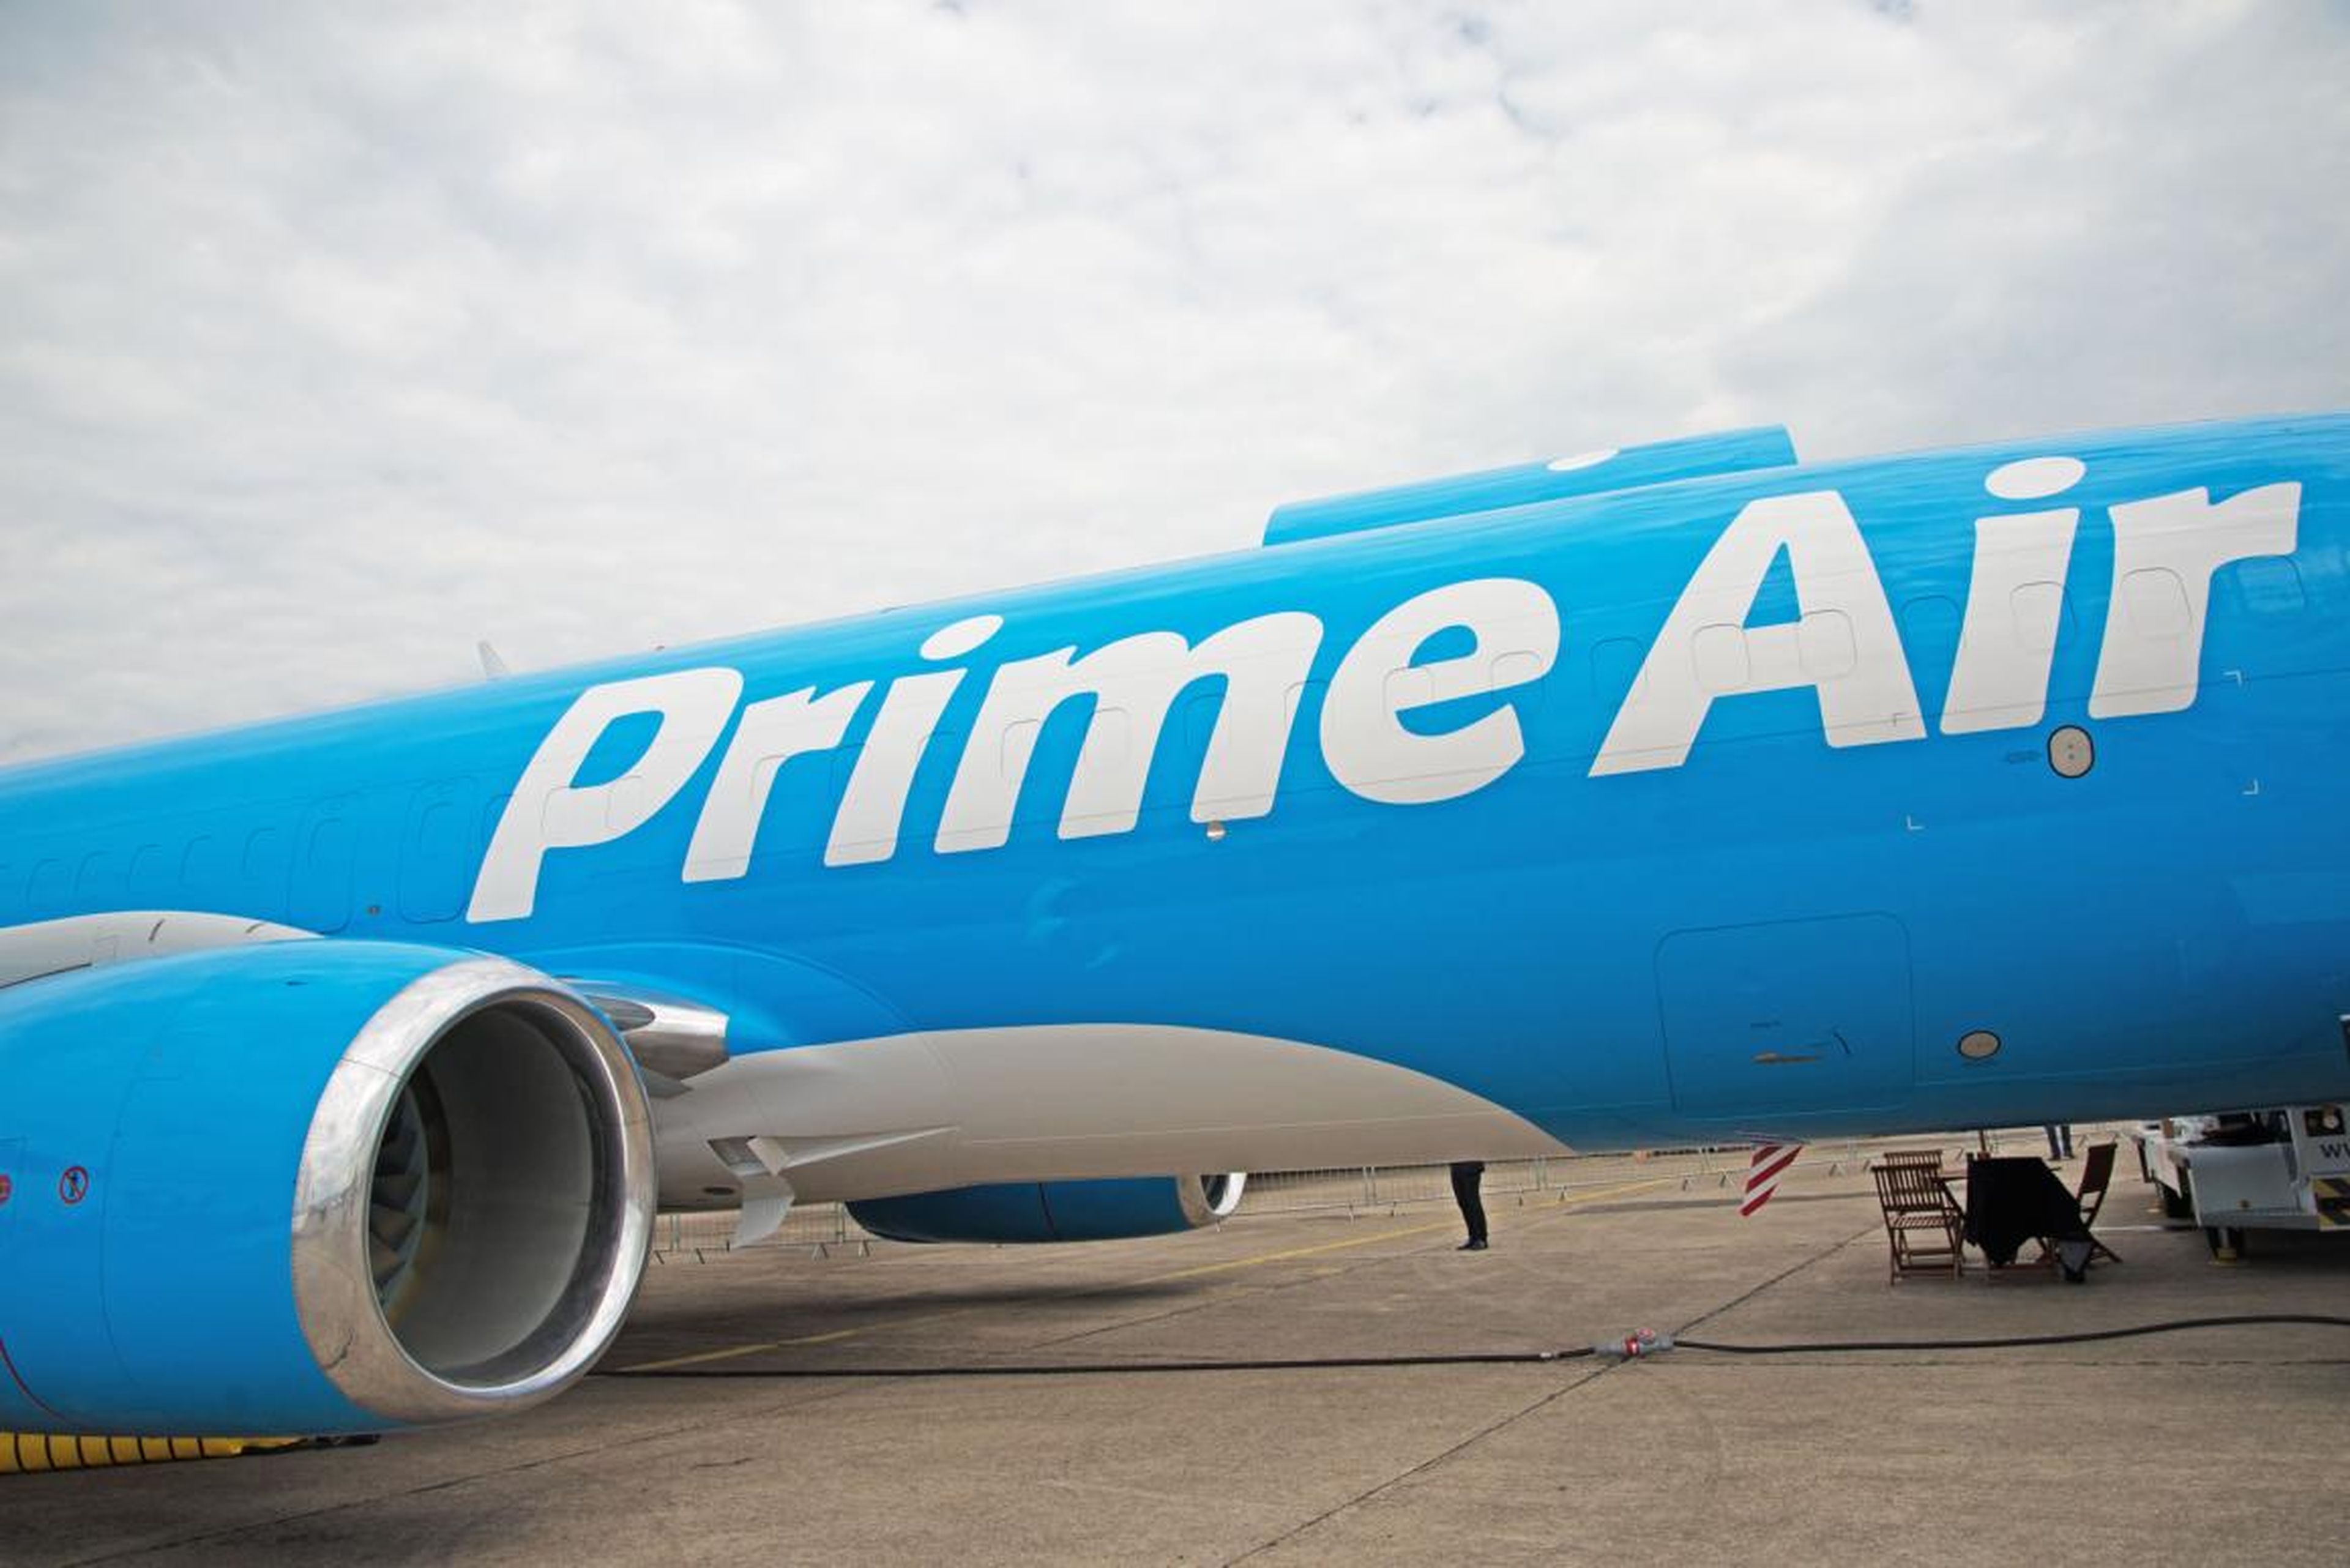 Amazon promises speedy delivery on millions of items, and launched its own airline in 2016 so it could have its own cargo planes to fulfill that promise.